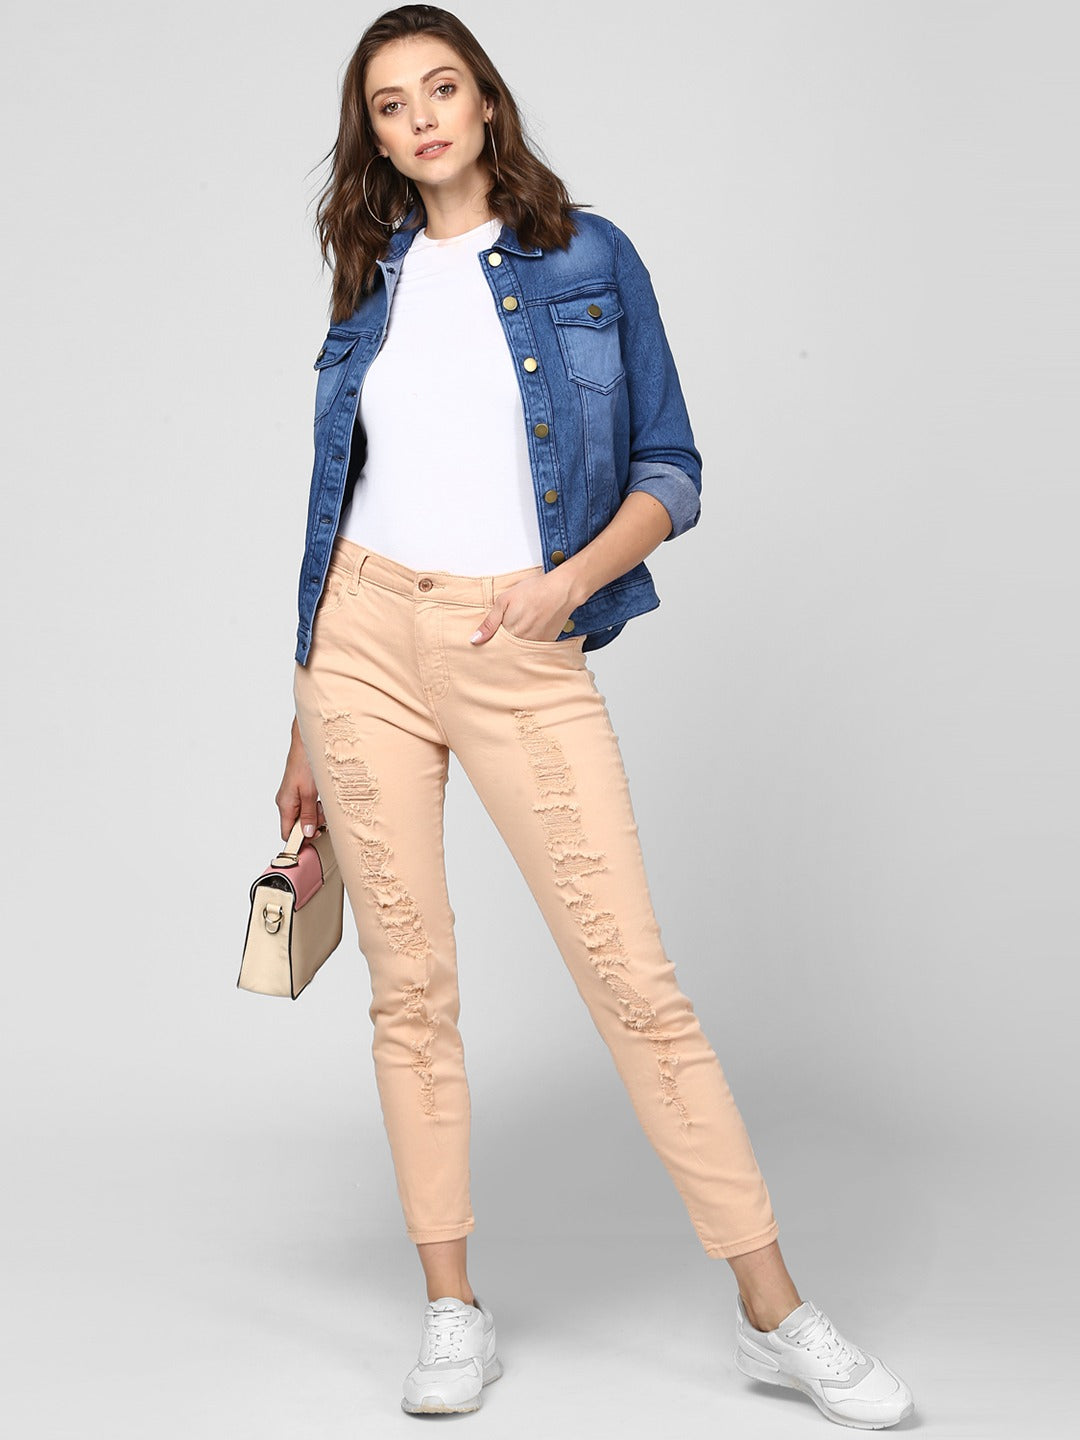 Stylish denim jacket for contemporary women, paired with casual beige chinos and white sneakers, creating a versatile and fashion-forward look.